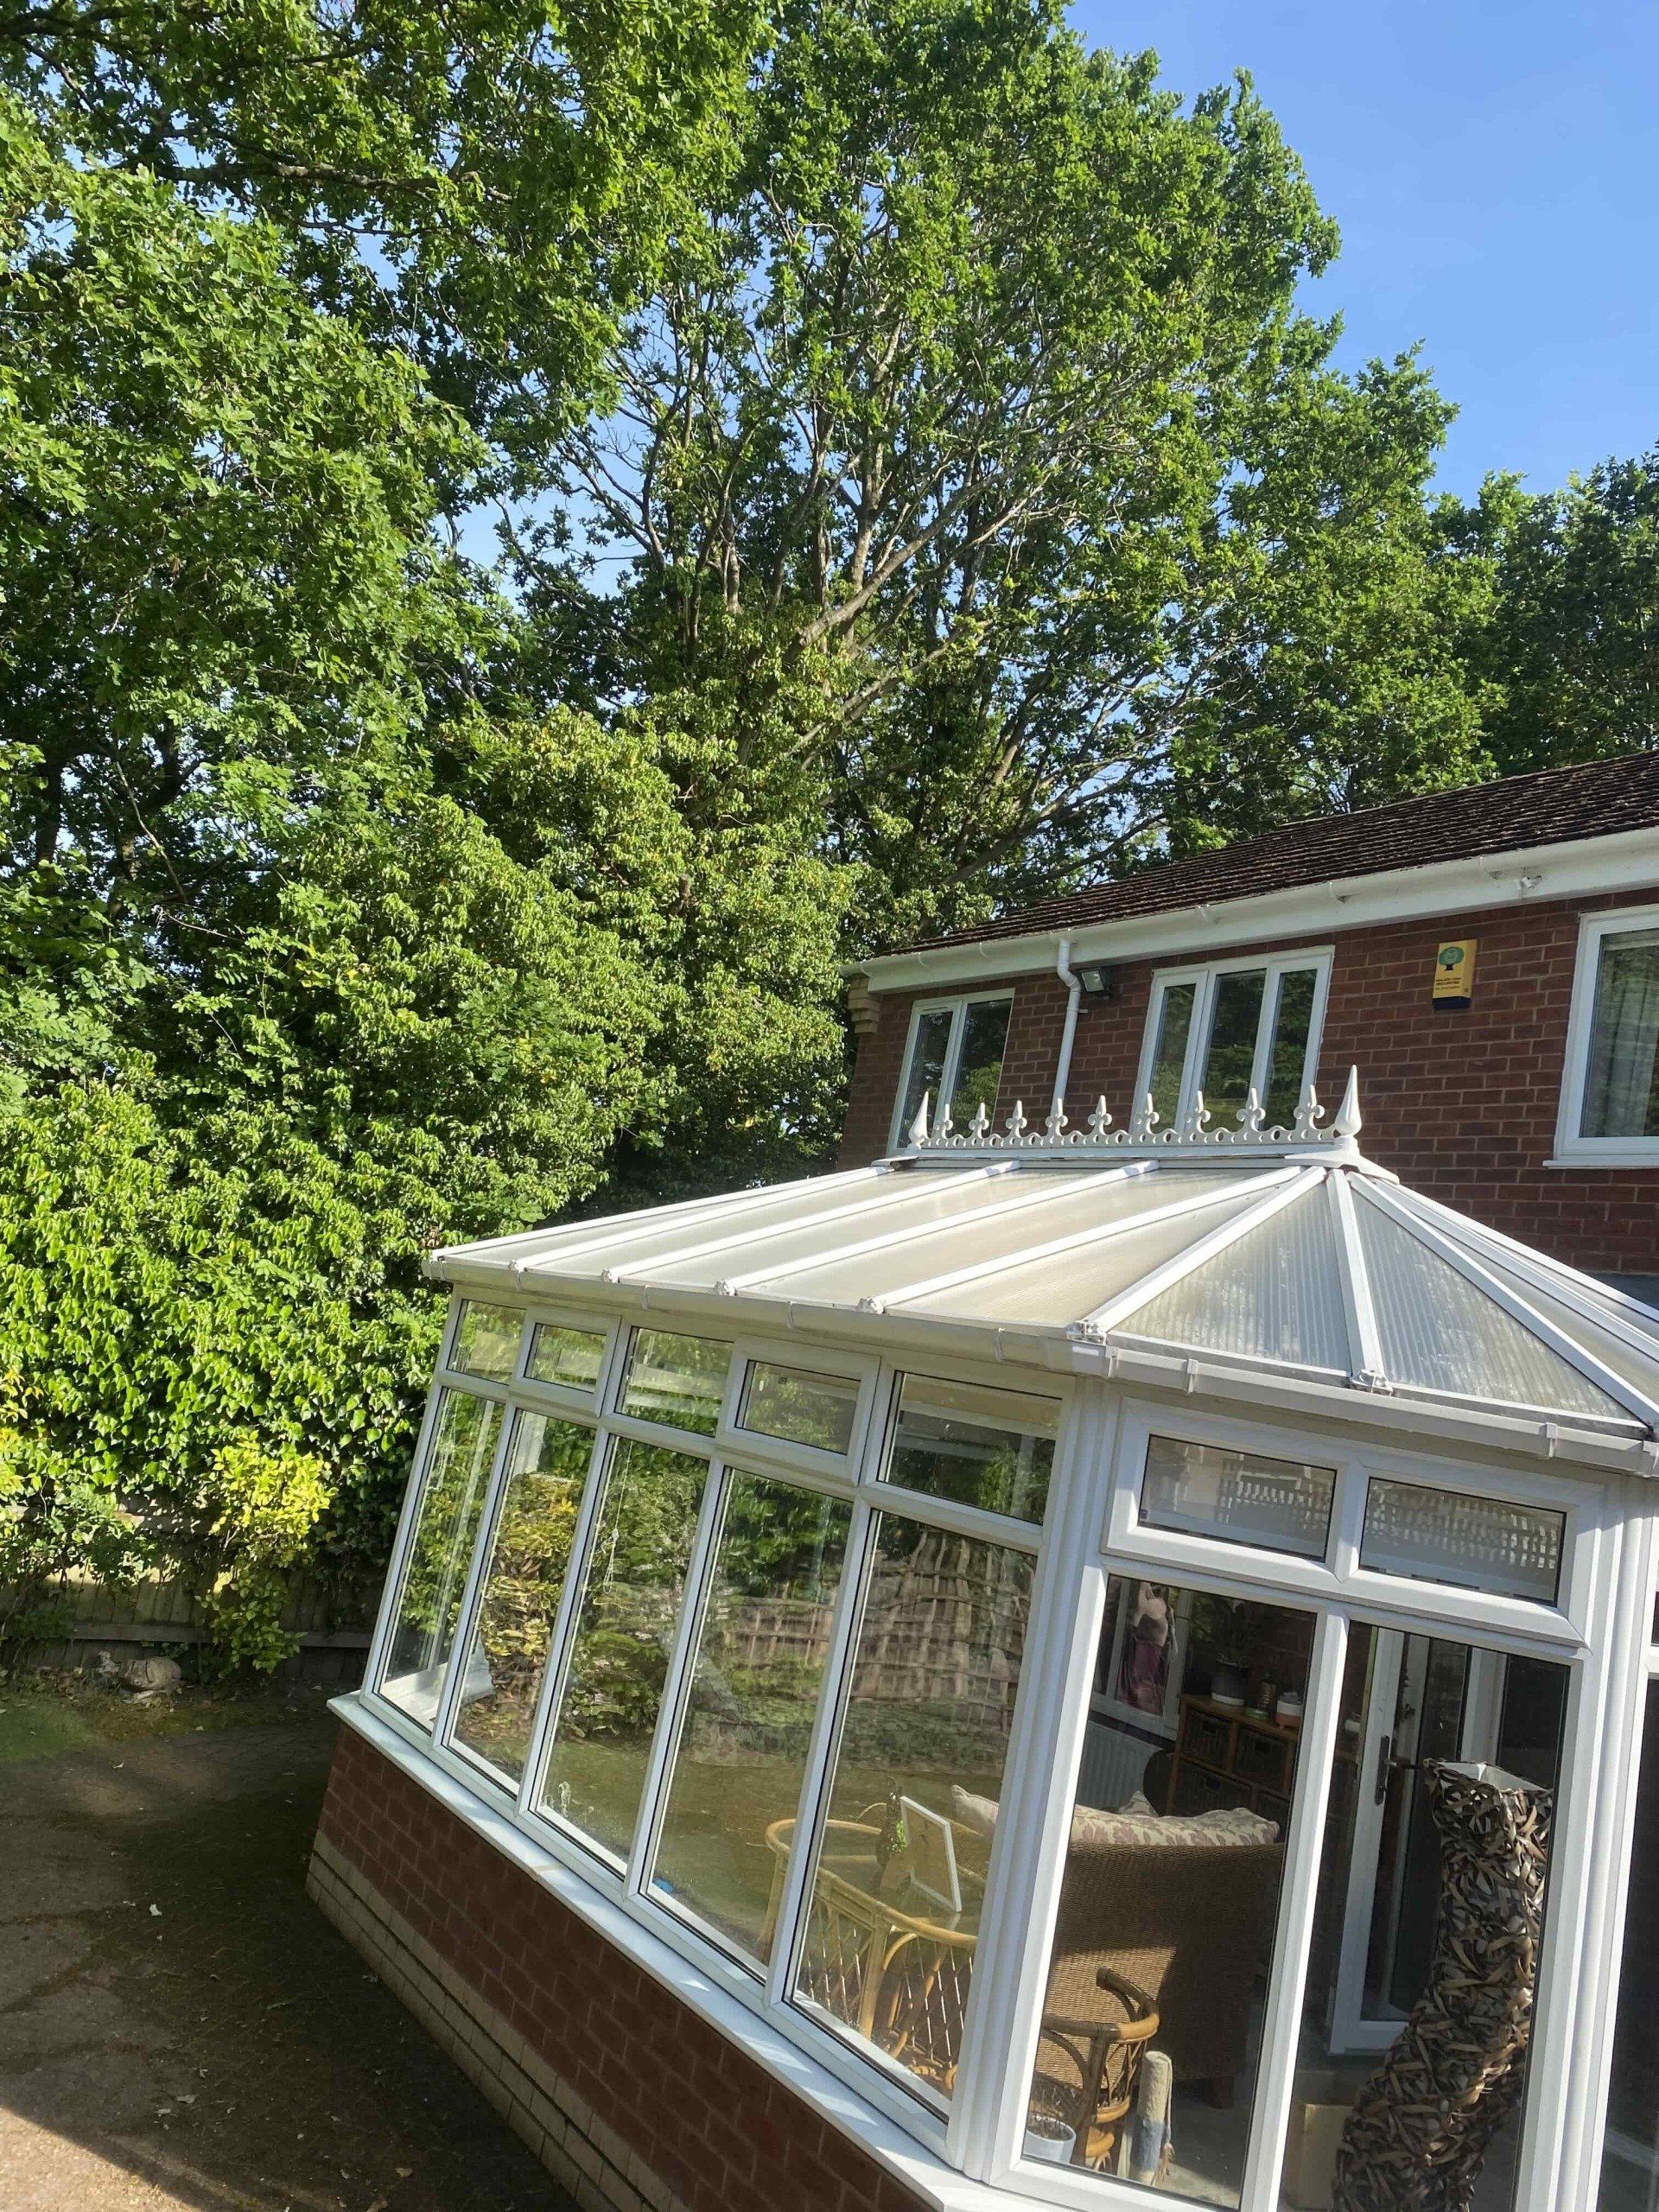 Cleaned conservatory rood in Solihull under trees